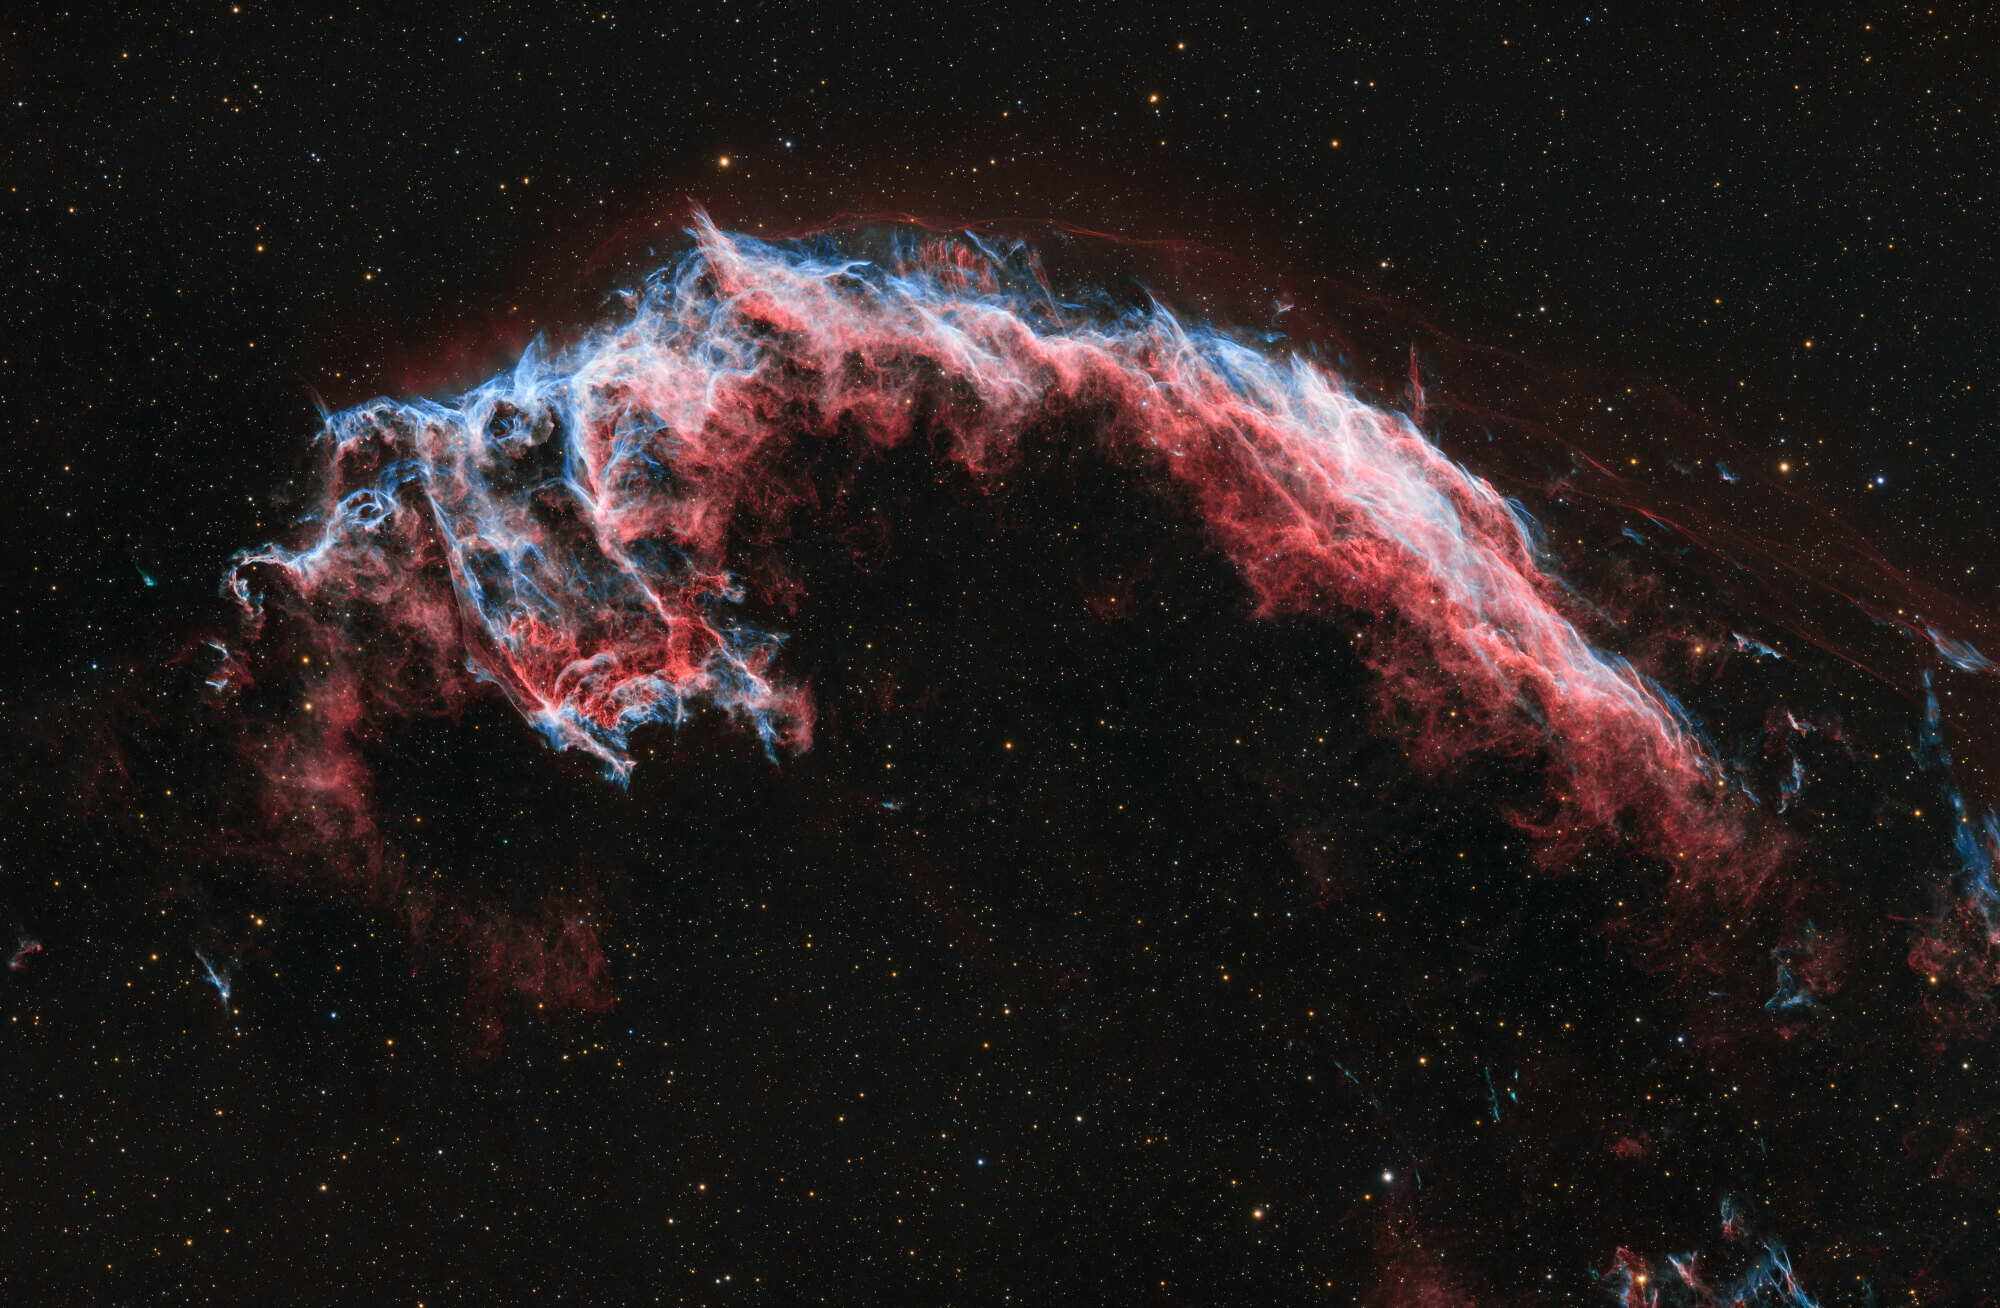 A red and blue nebula visible in a black sky.